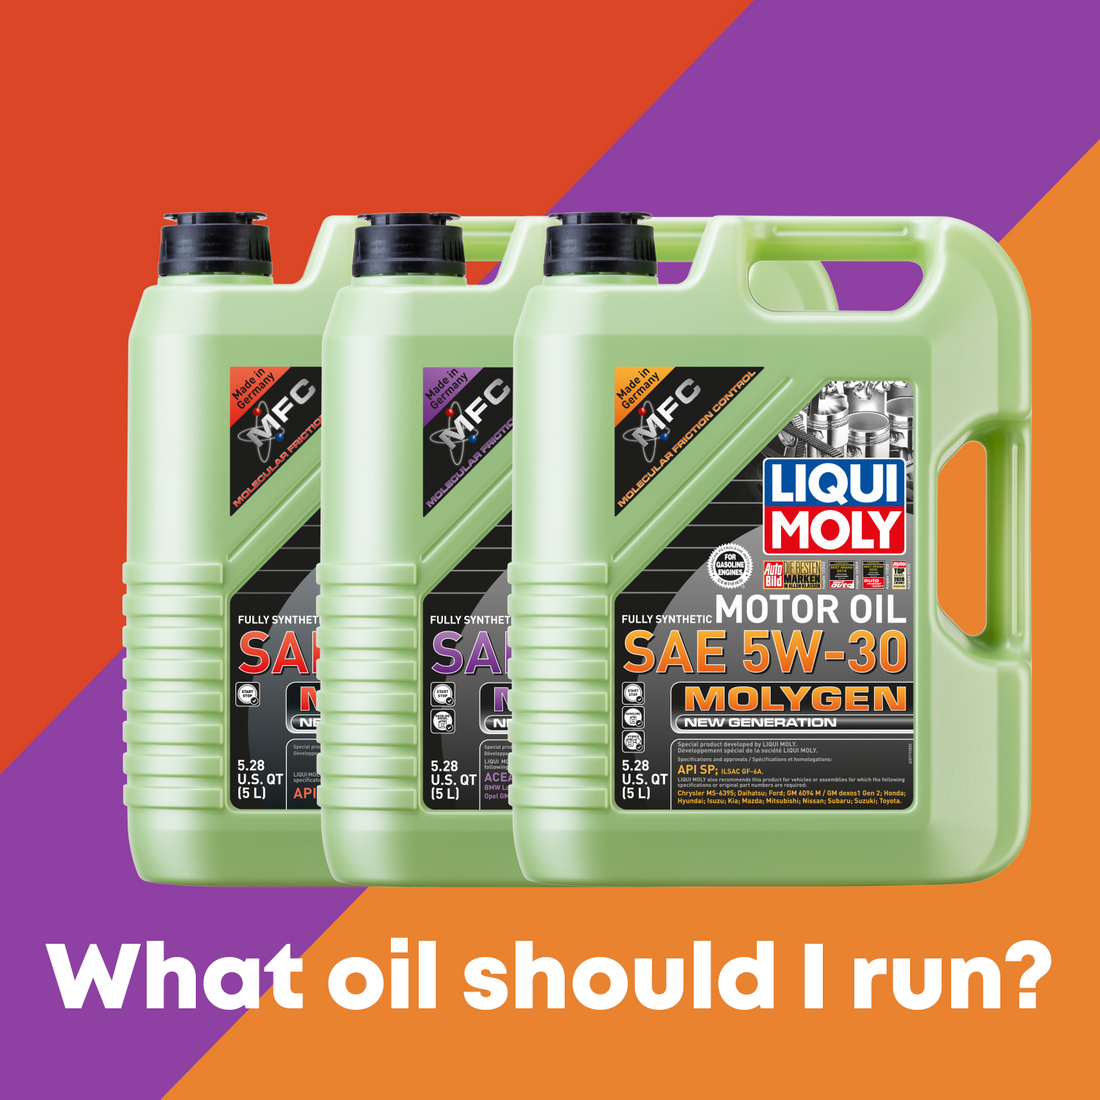 What oil should I run in my EcoBoost Mustang? Which oil should I use in my Coyote Mustang?